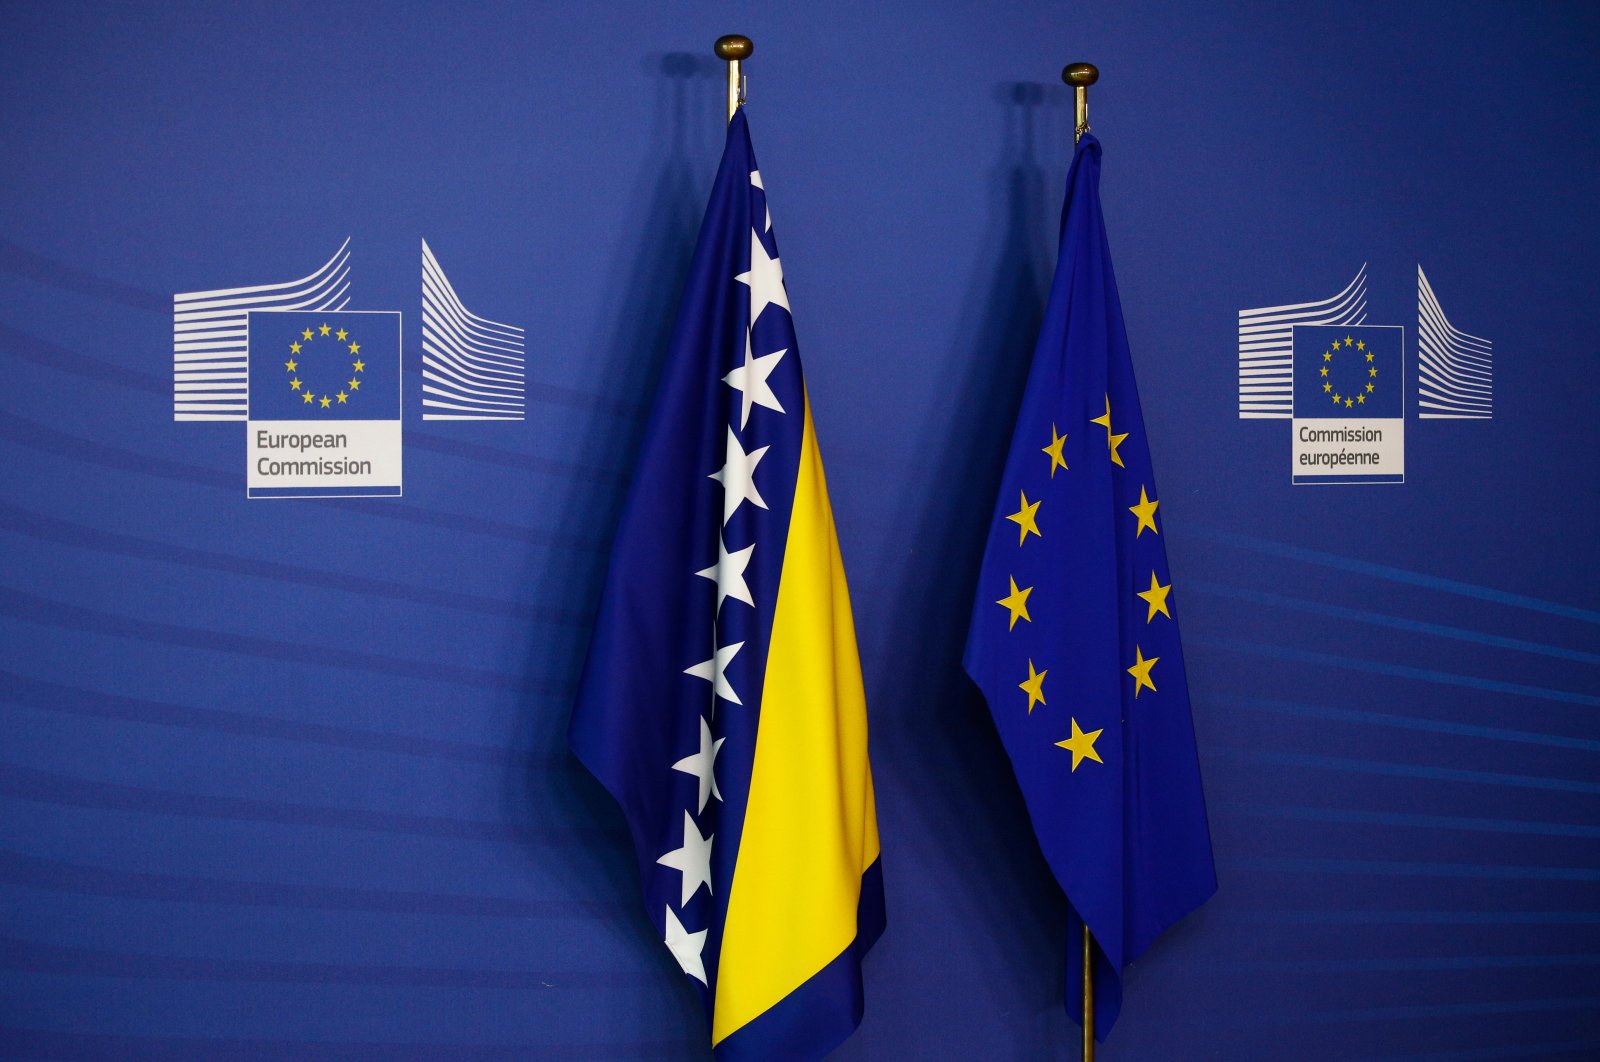 The flags of the European Union and Bosnia-Herzegovina are seen outside of the European Commission, Brussels, Belgium, March 4, 2019. (Shutterstock Photo)